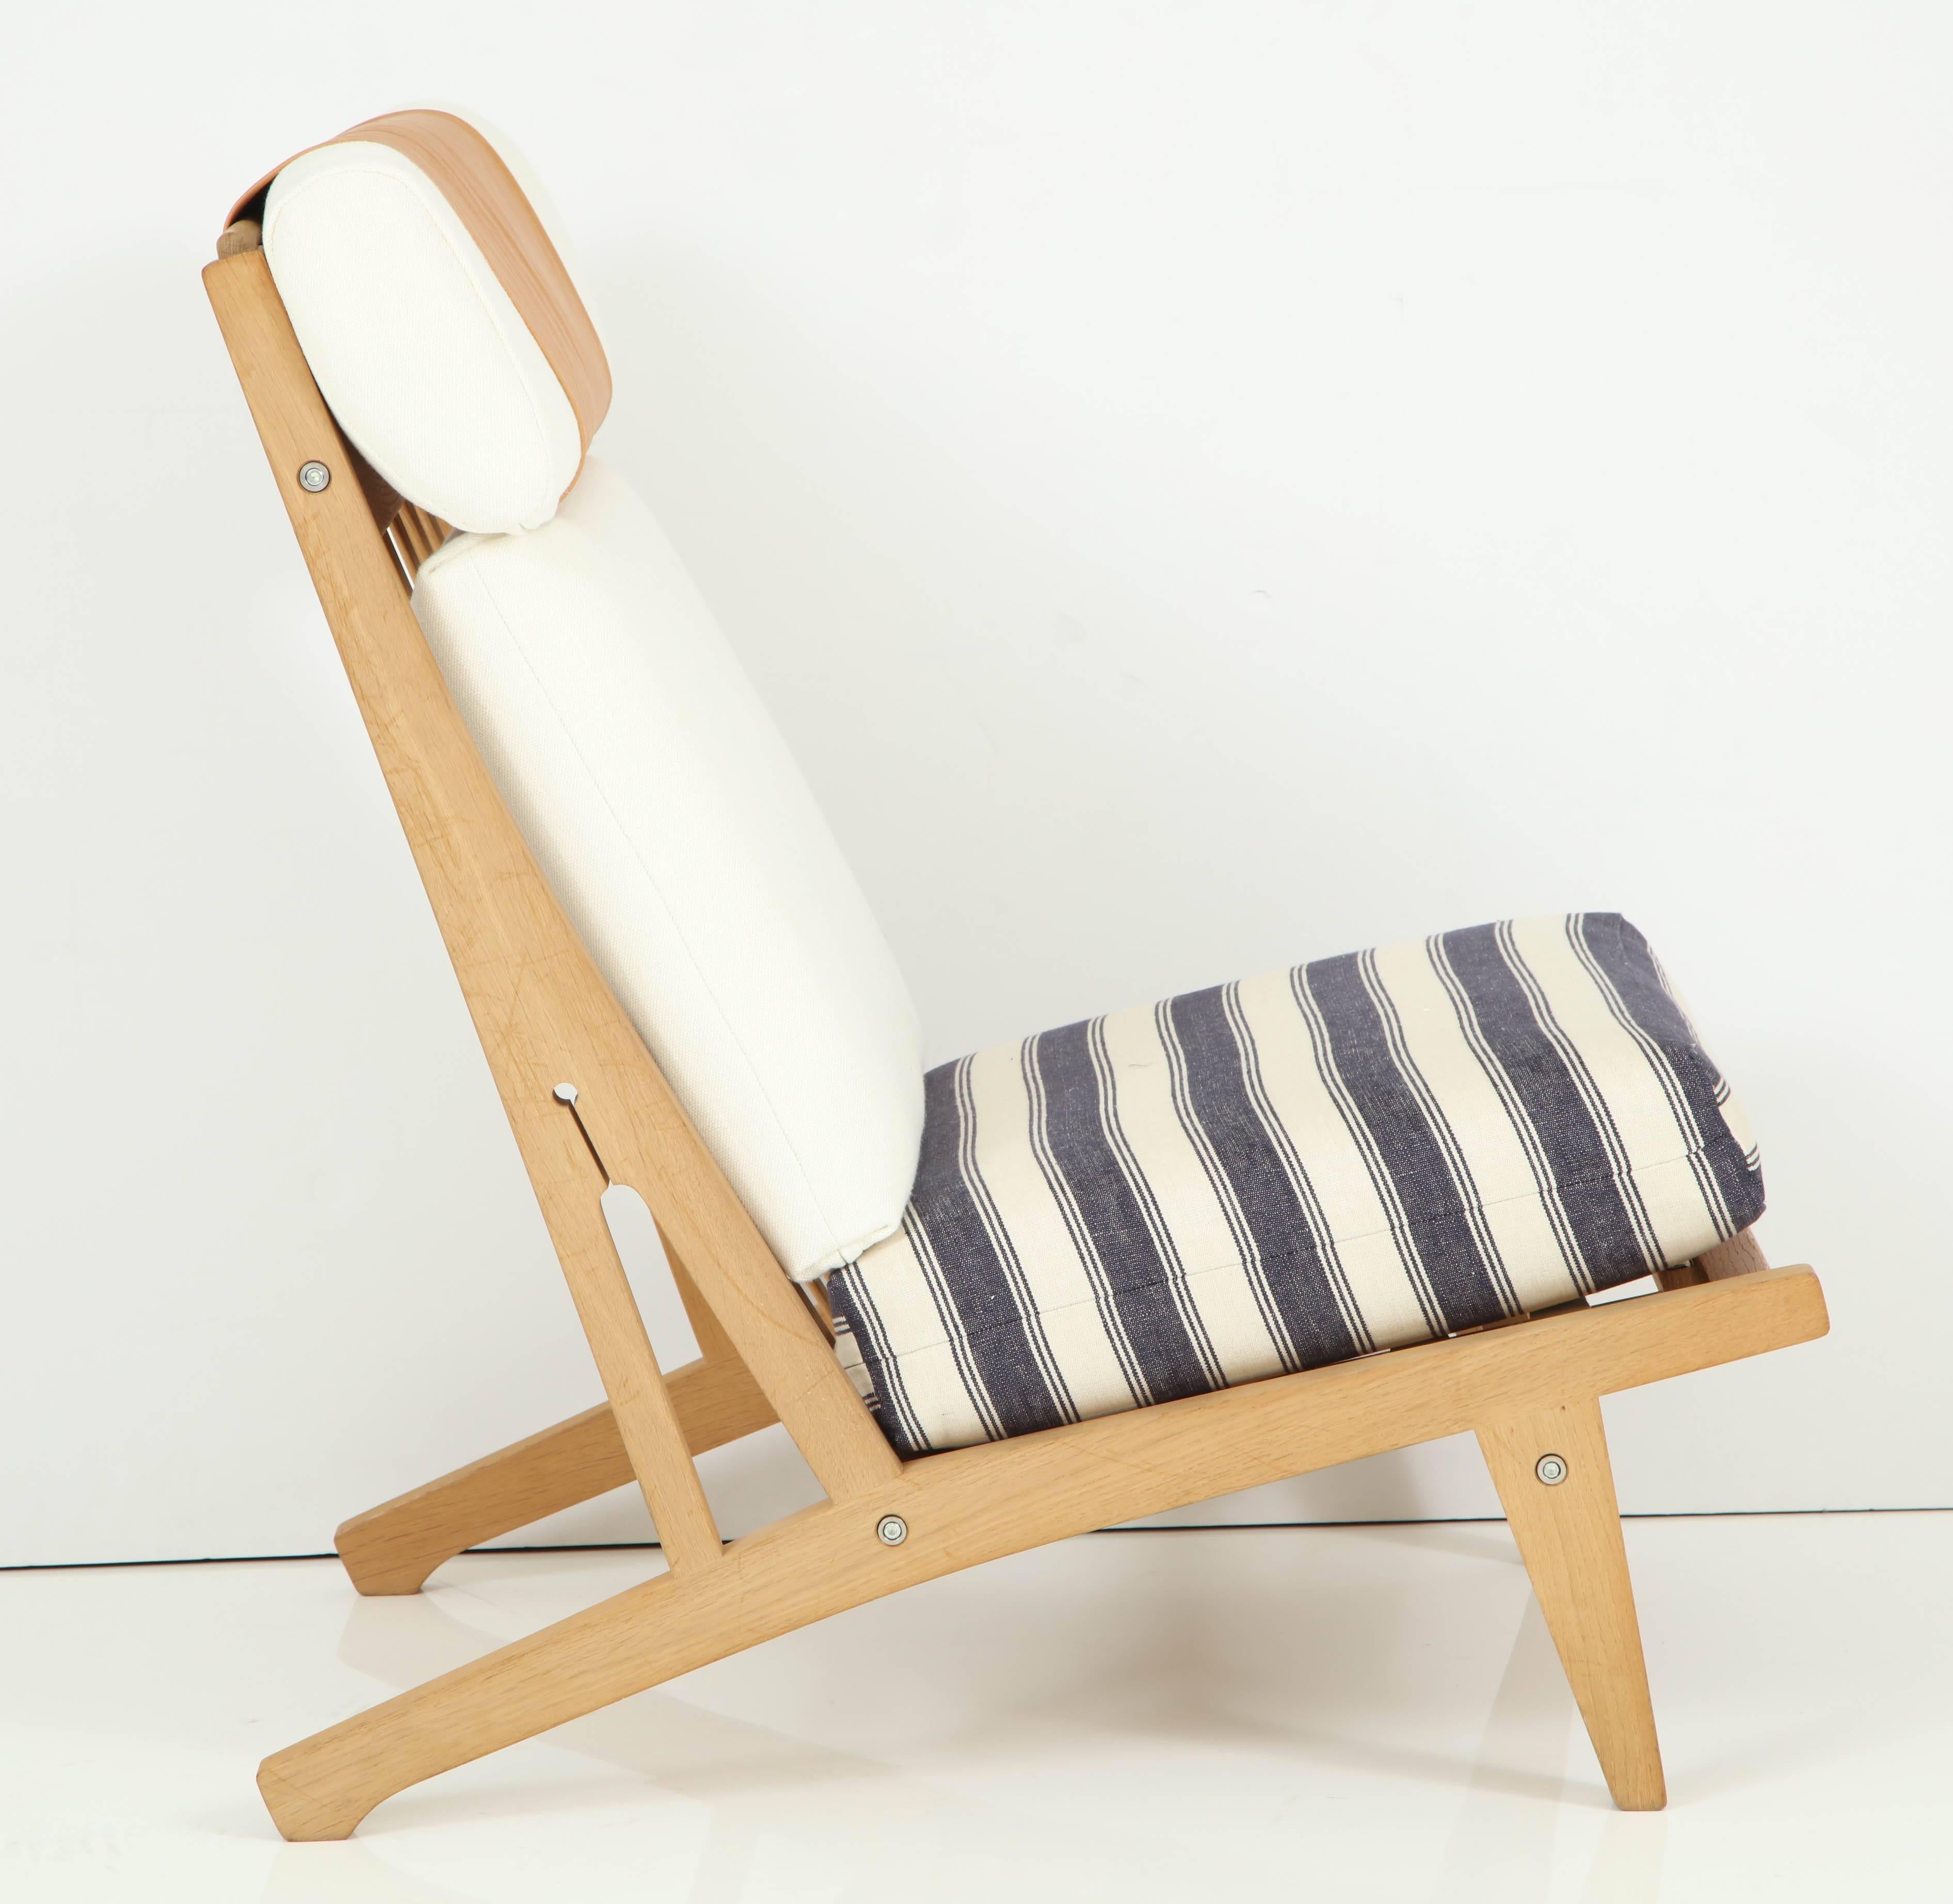 Hans J Wegner GETAMA lounge chair made of oak and reupholstered in Rogers & Goffigon linen fabric and leather. It was professionally soaped to protect the chair and all the straps were replaced. The chair is signed with branded manufacturer's mark